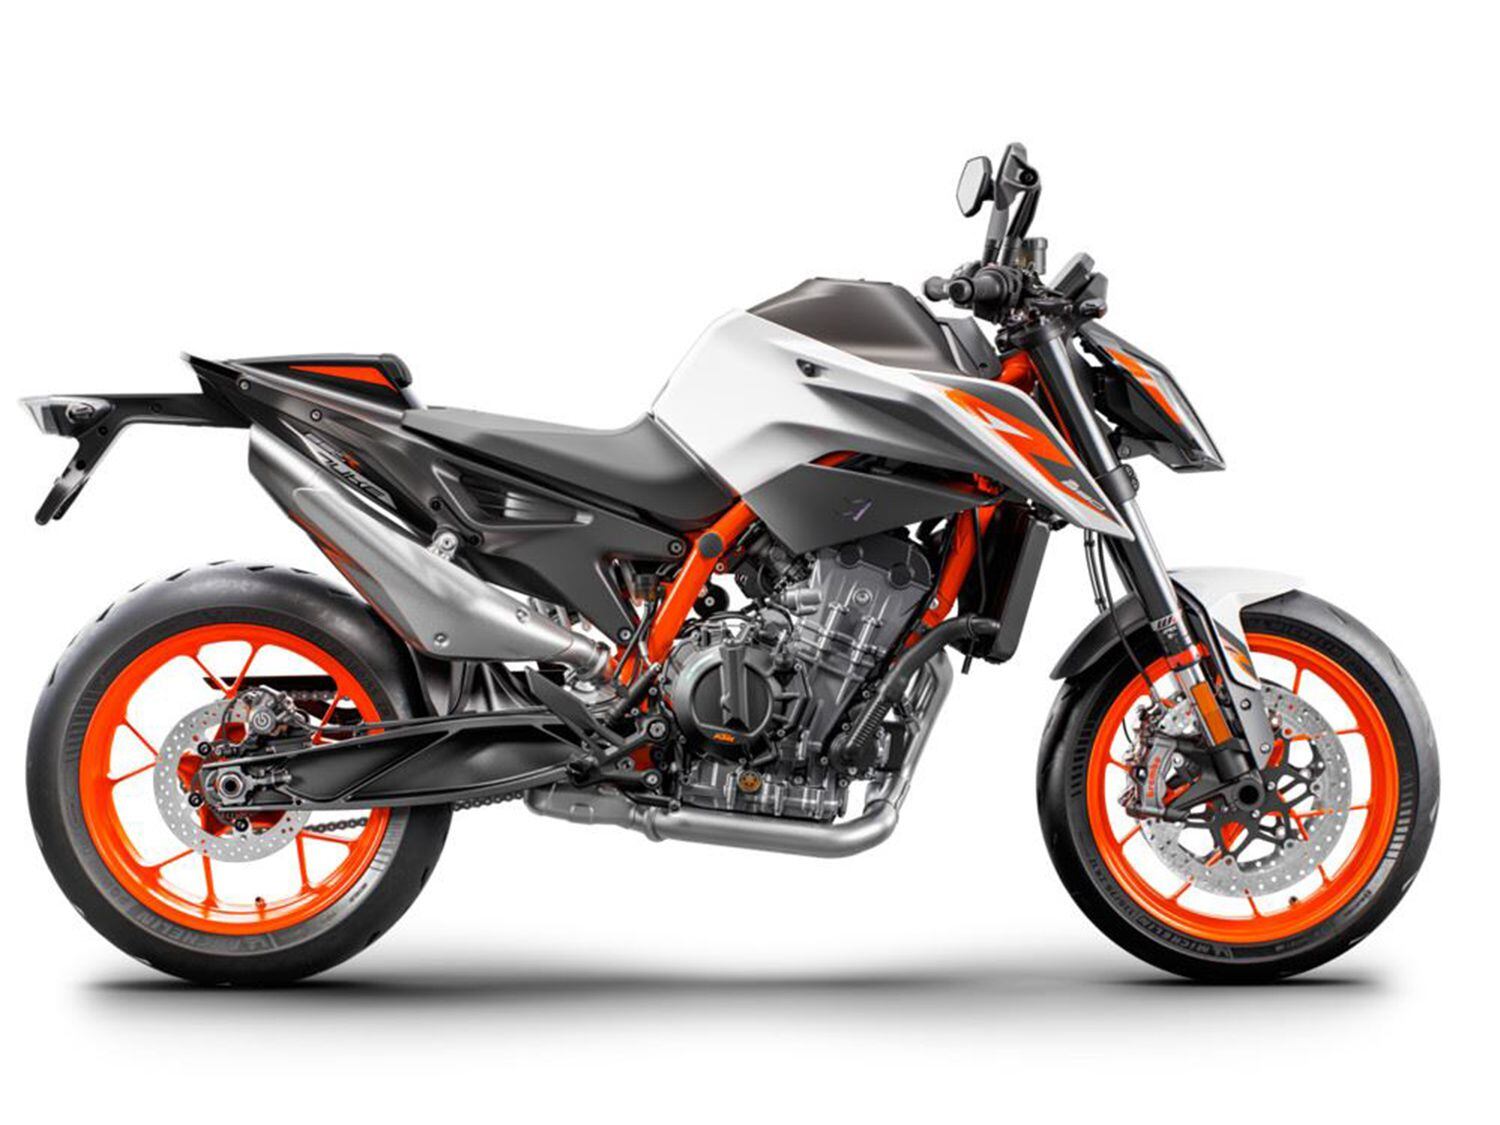 2020 KTM 890 Duke R First Look | Cycle World